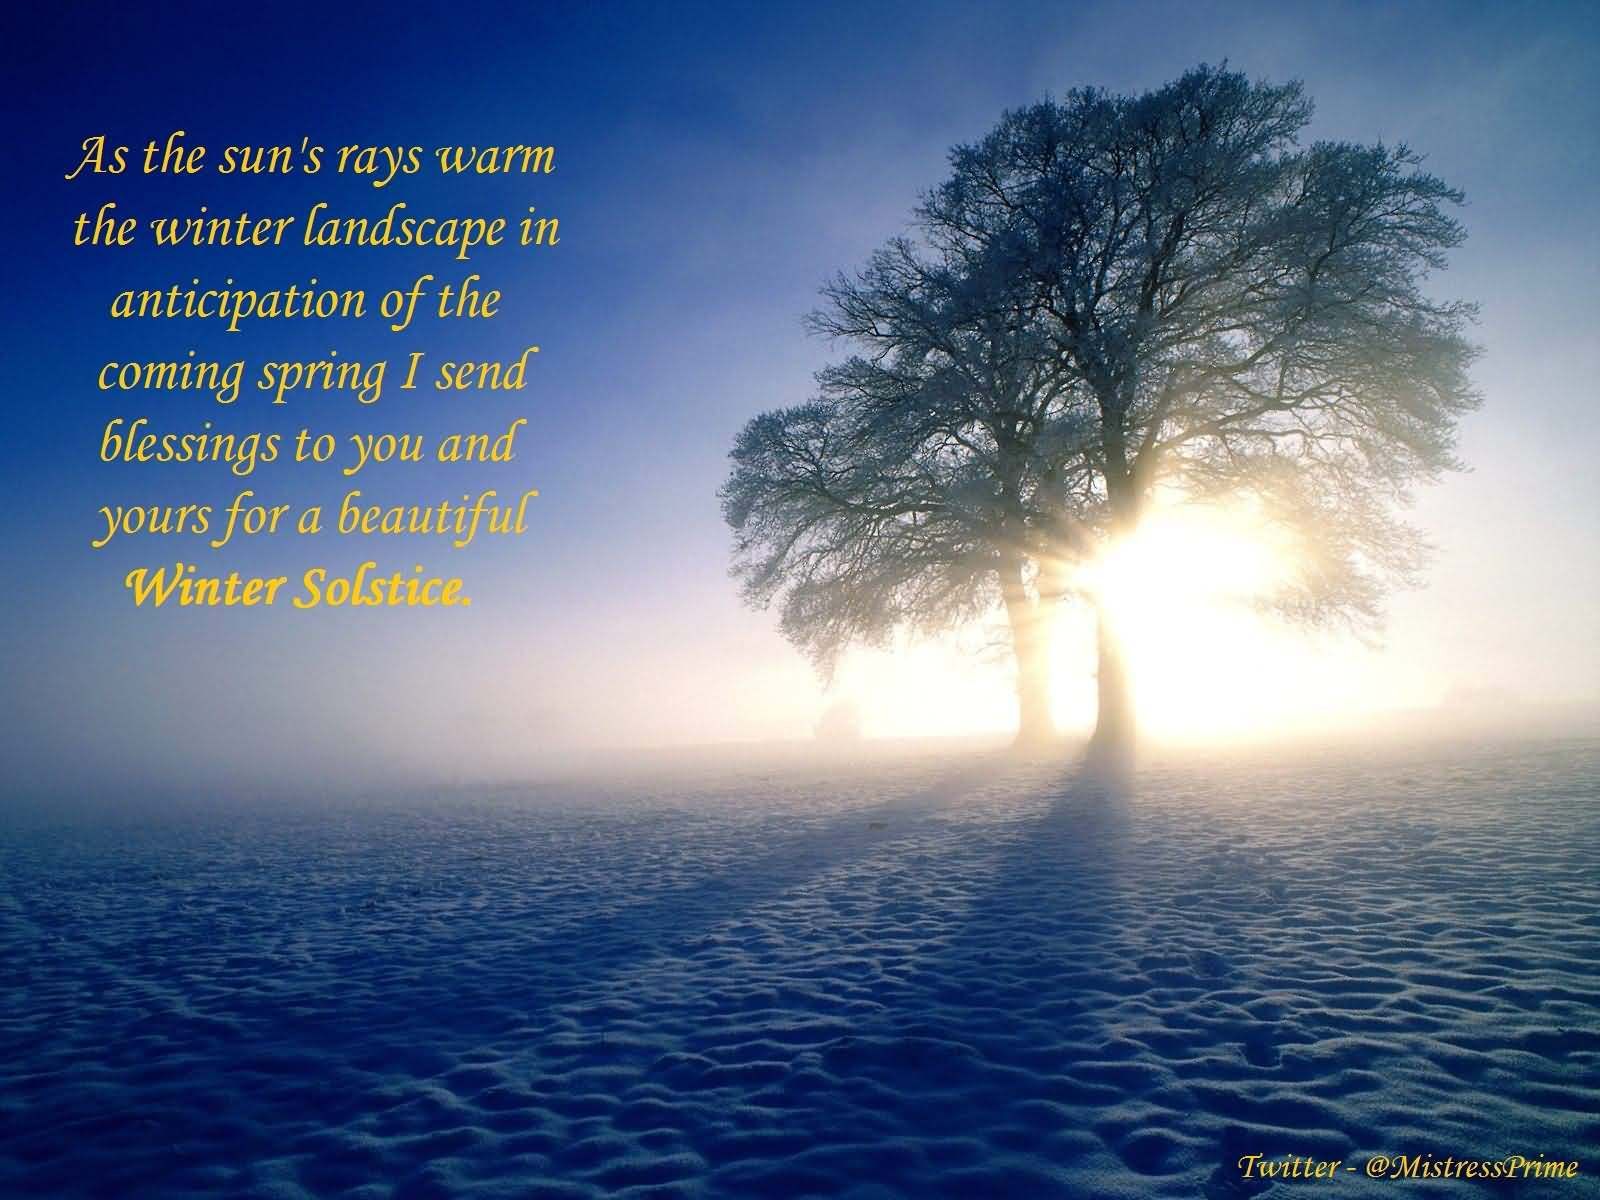 Winter Solstice Greetings Picture. Winter landscape, Winter solstice, Solstice